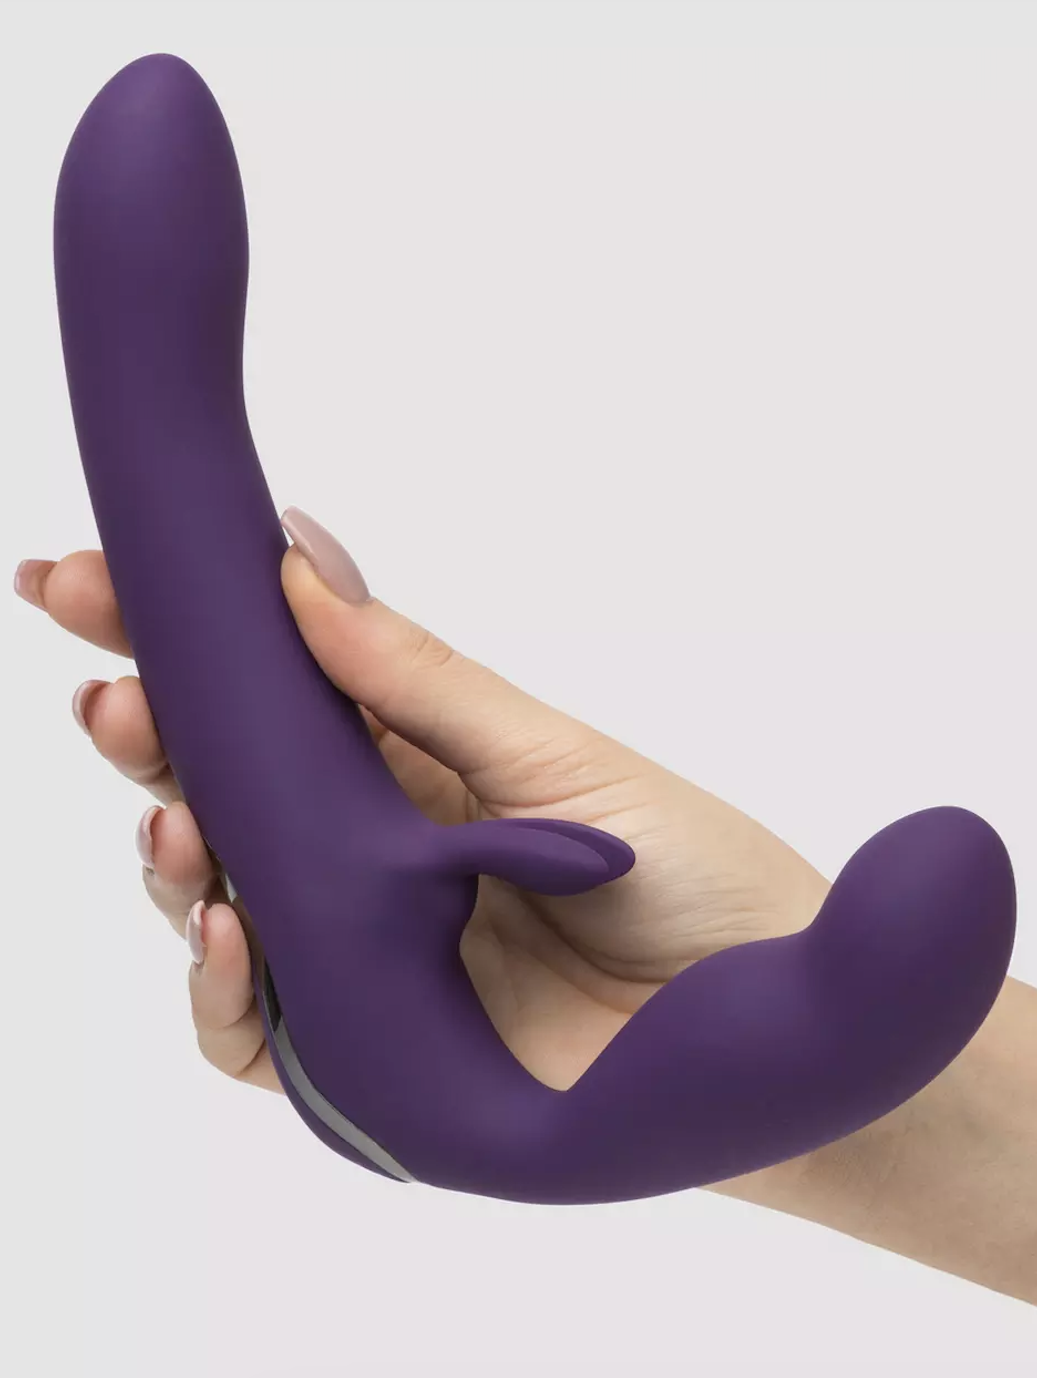 person holding the dildo